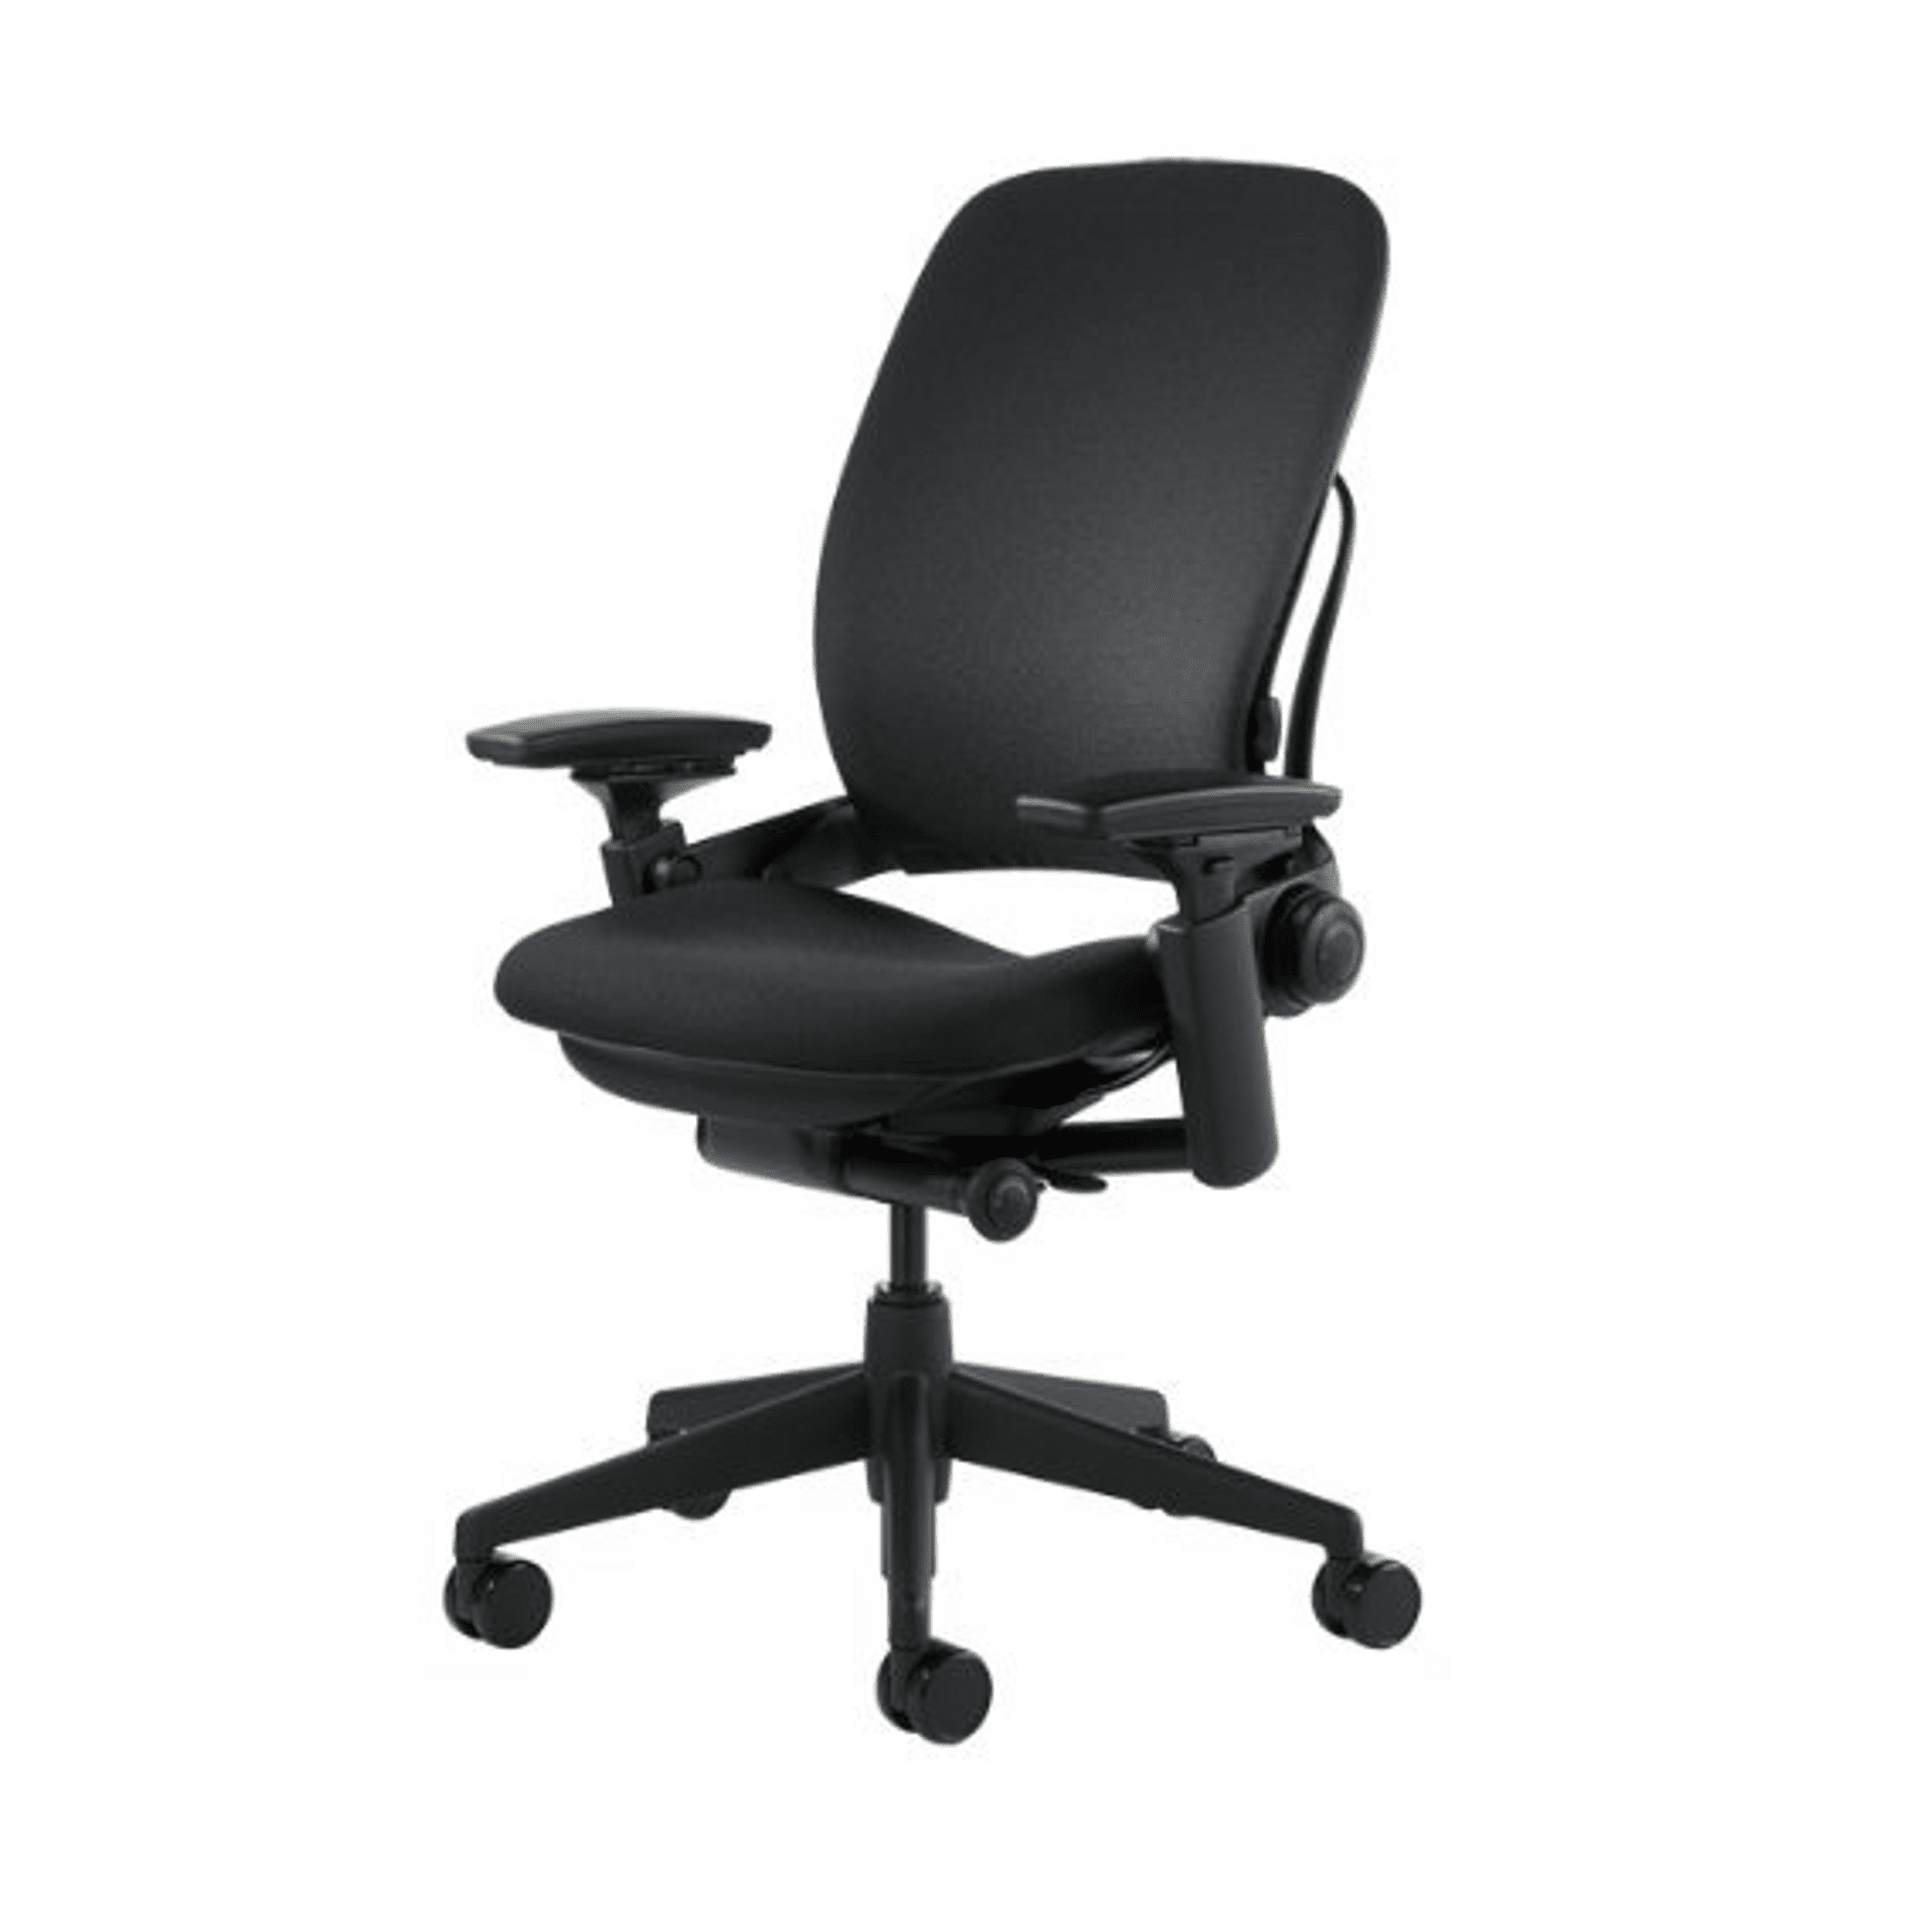 Steelcase Leap chair V2 | Black | Fabric Fully Adjustable-12 Year